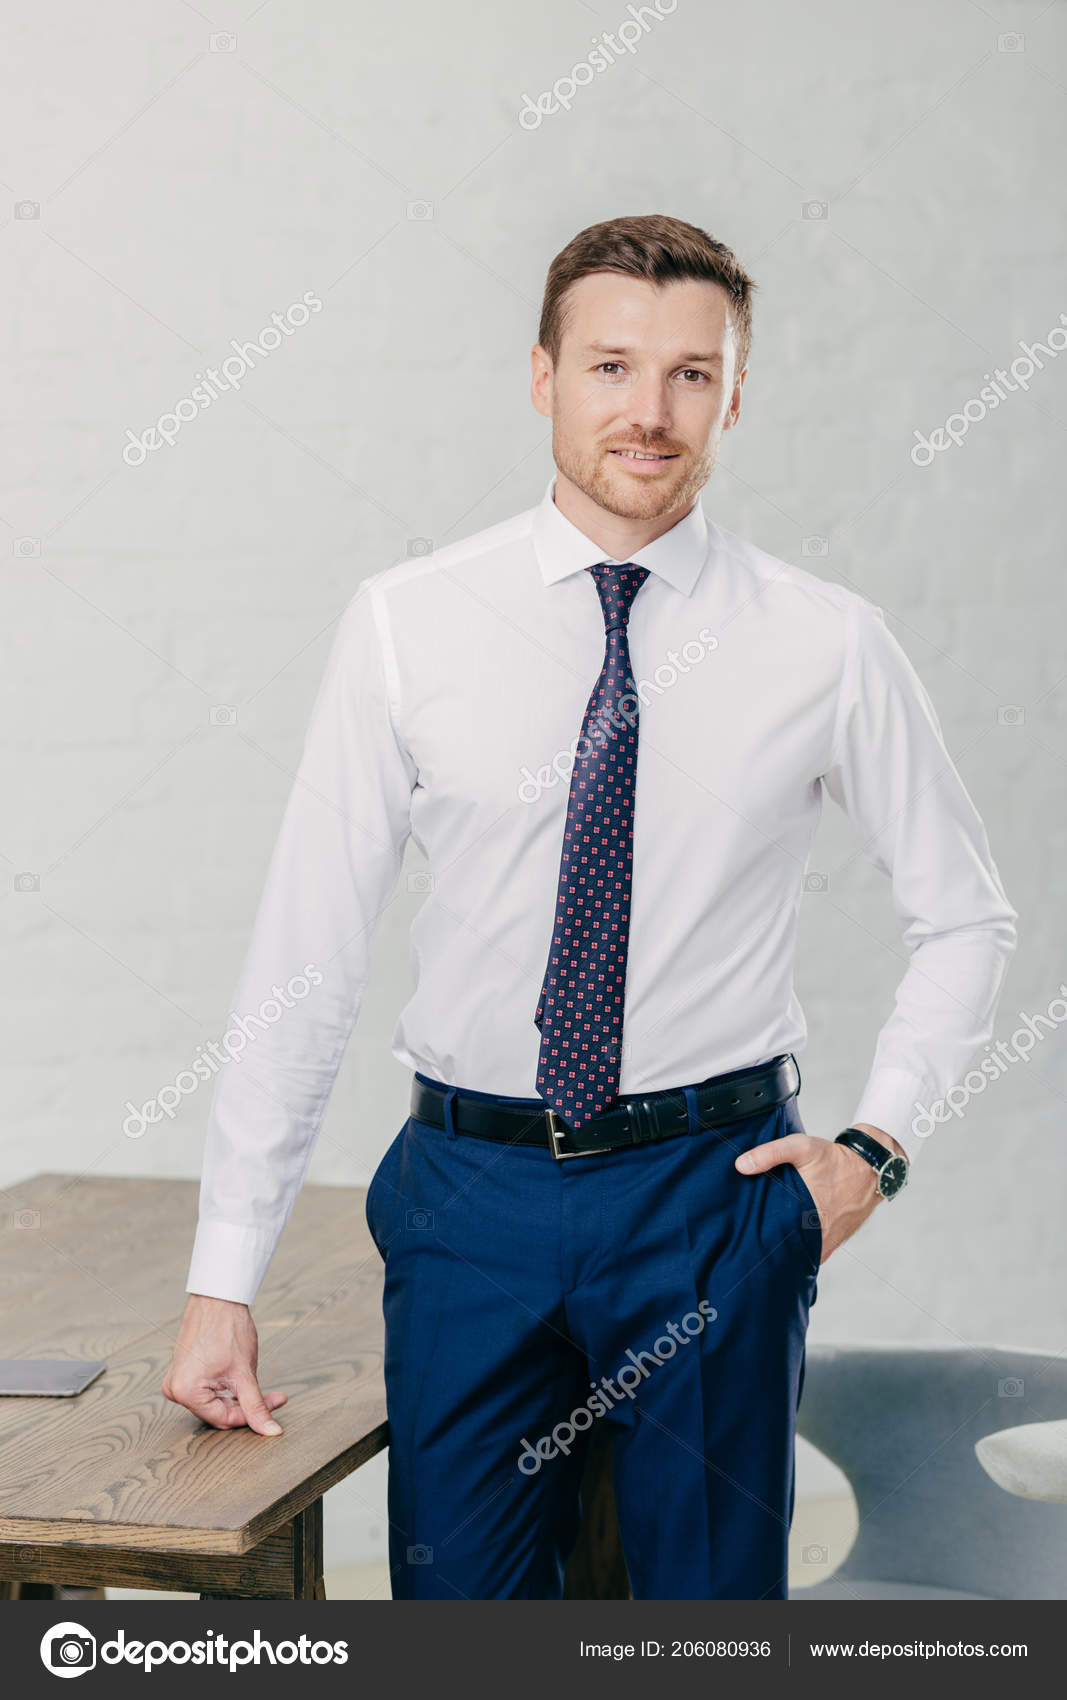 Corporate female CEO poses in modern office room wears spectacles and formal  outfit poses on Stock Photo by wayhomestudioo